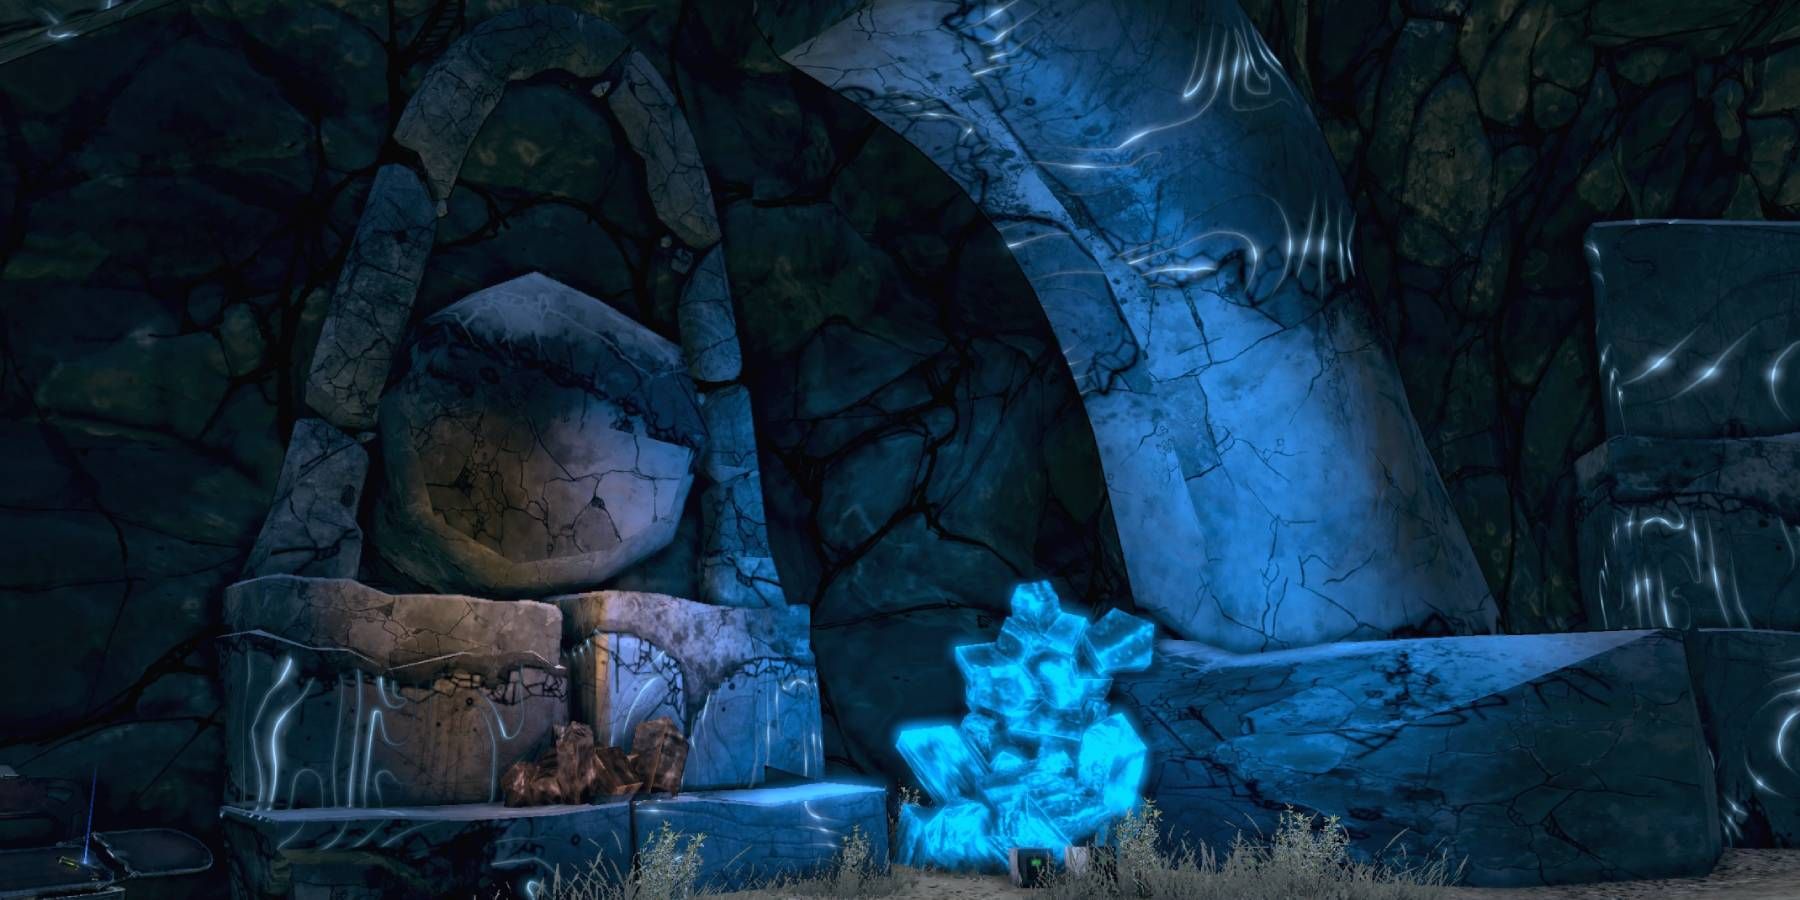 A vault symbol-shaped structure in a cave from Borderlands